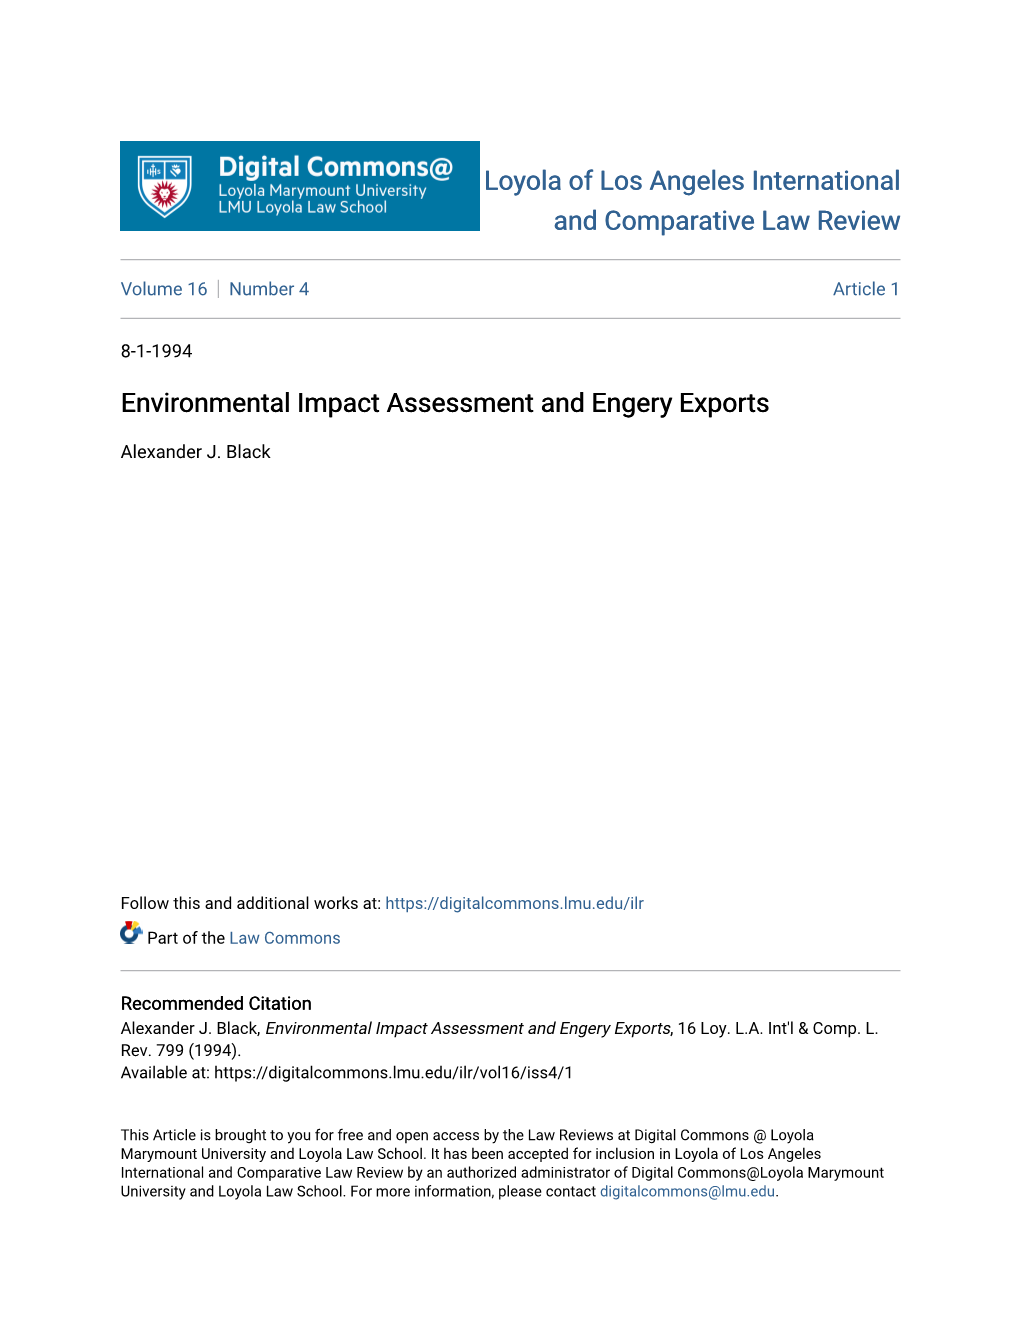 Environmental Impact Assessment and Engery Exports